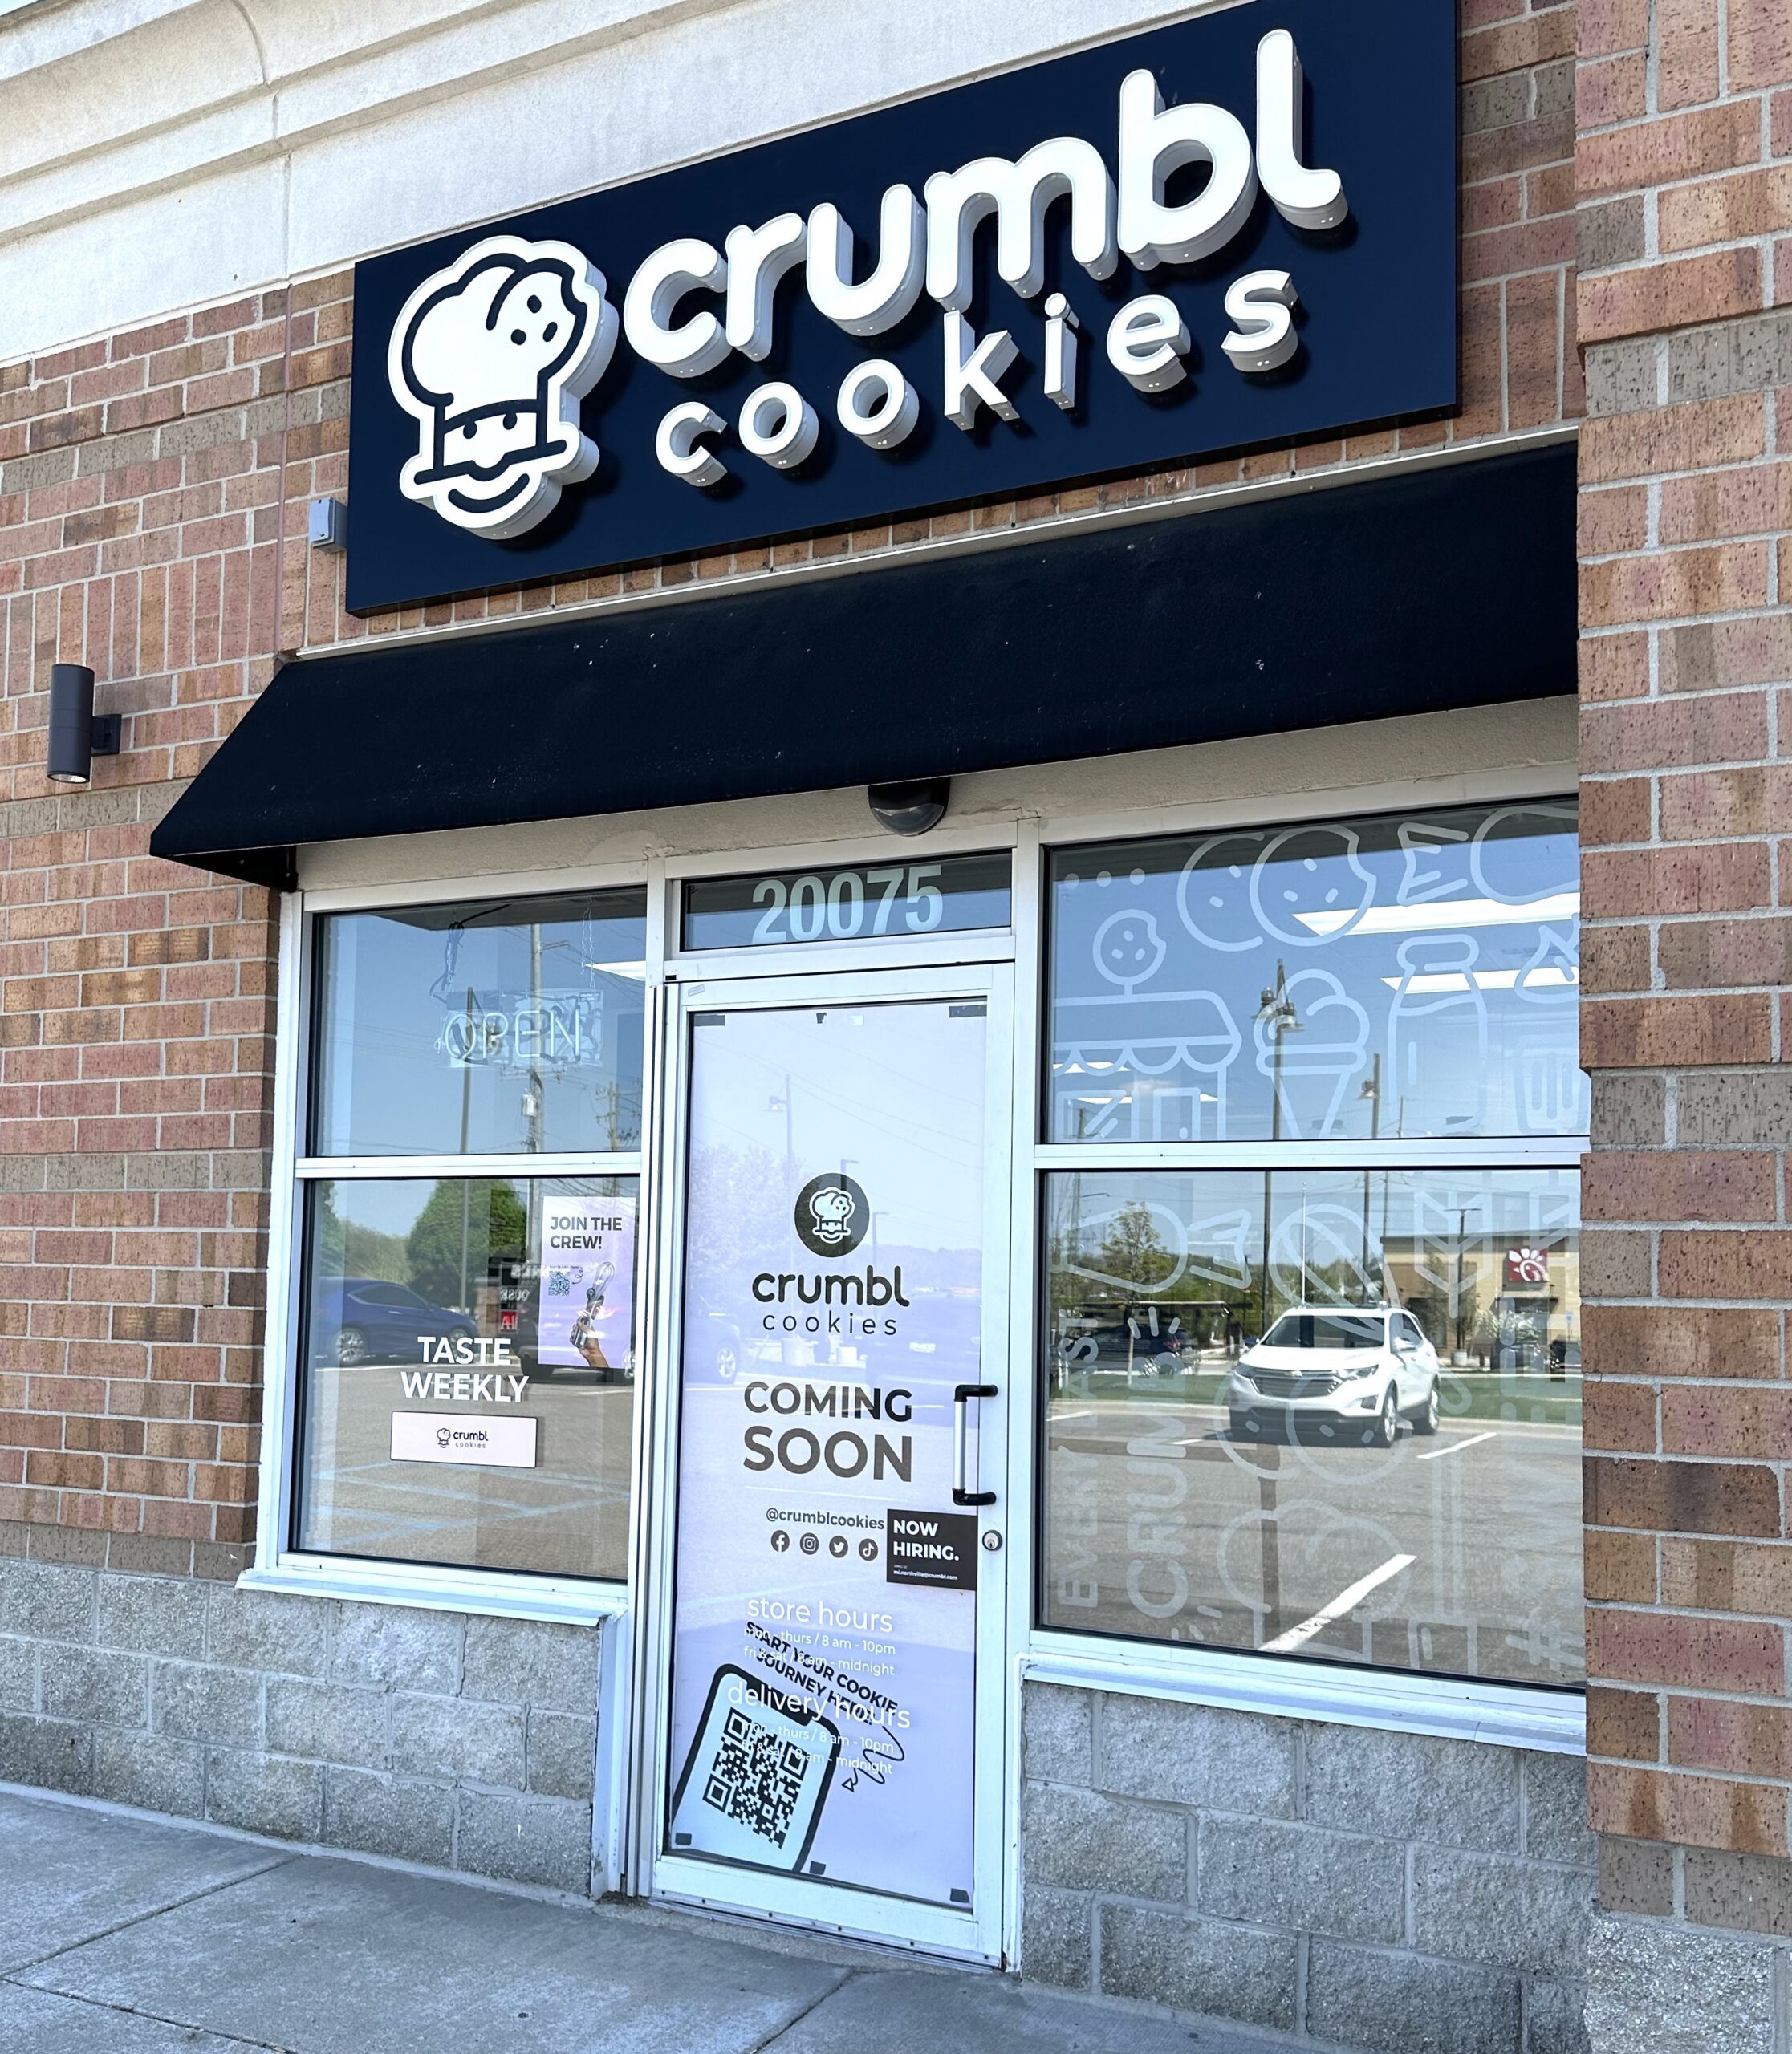 The new Crumbl Cookies is located at 20075 Haggerty Road in Northville.